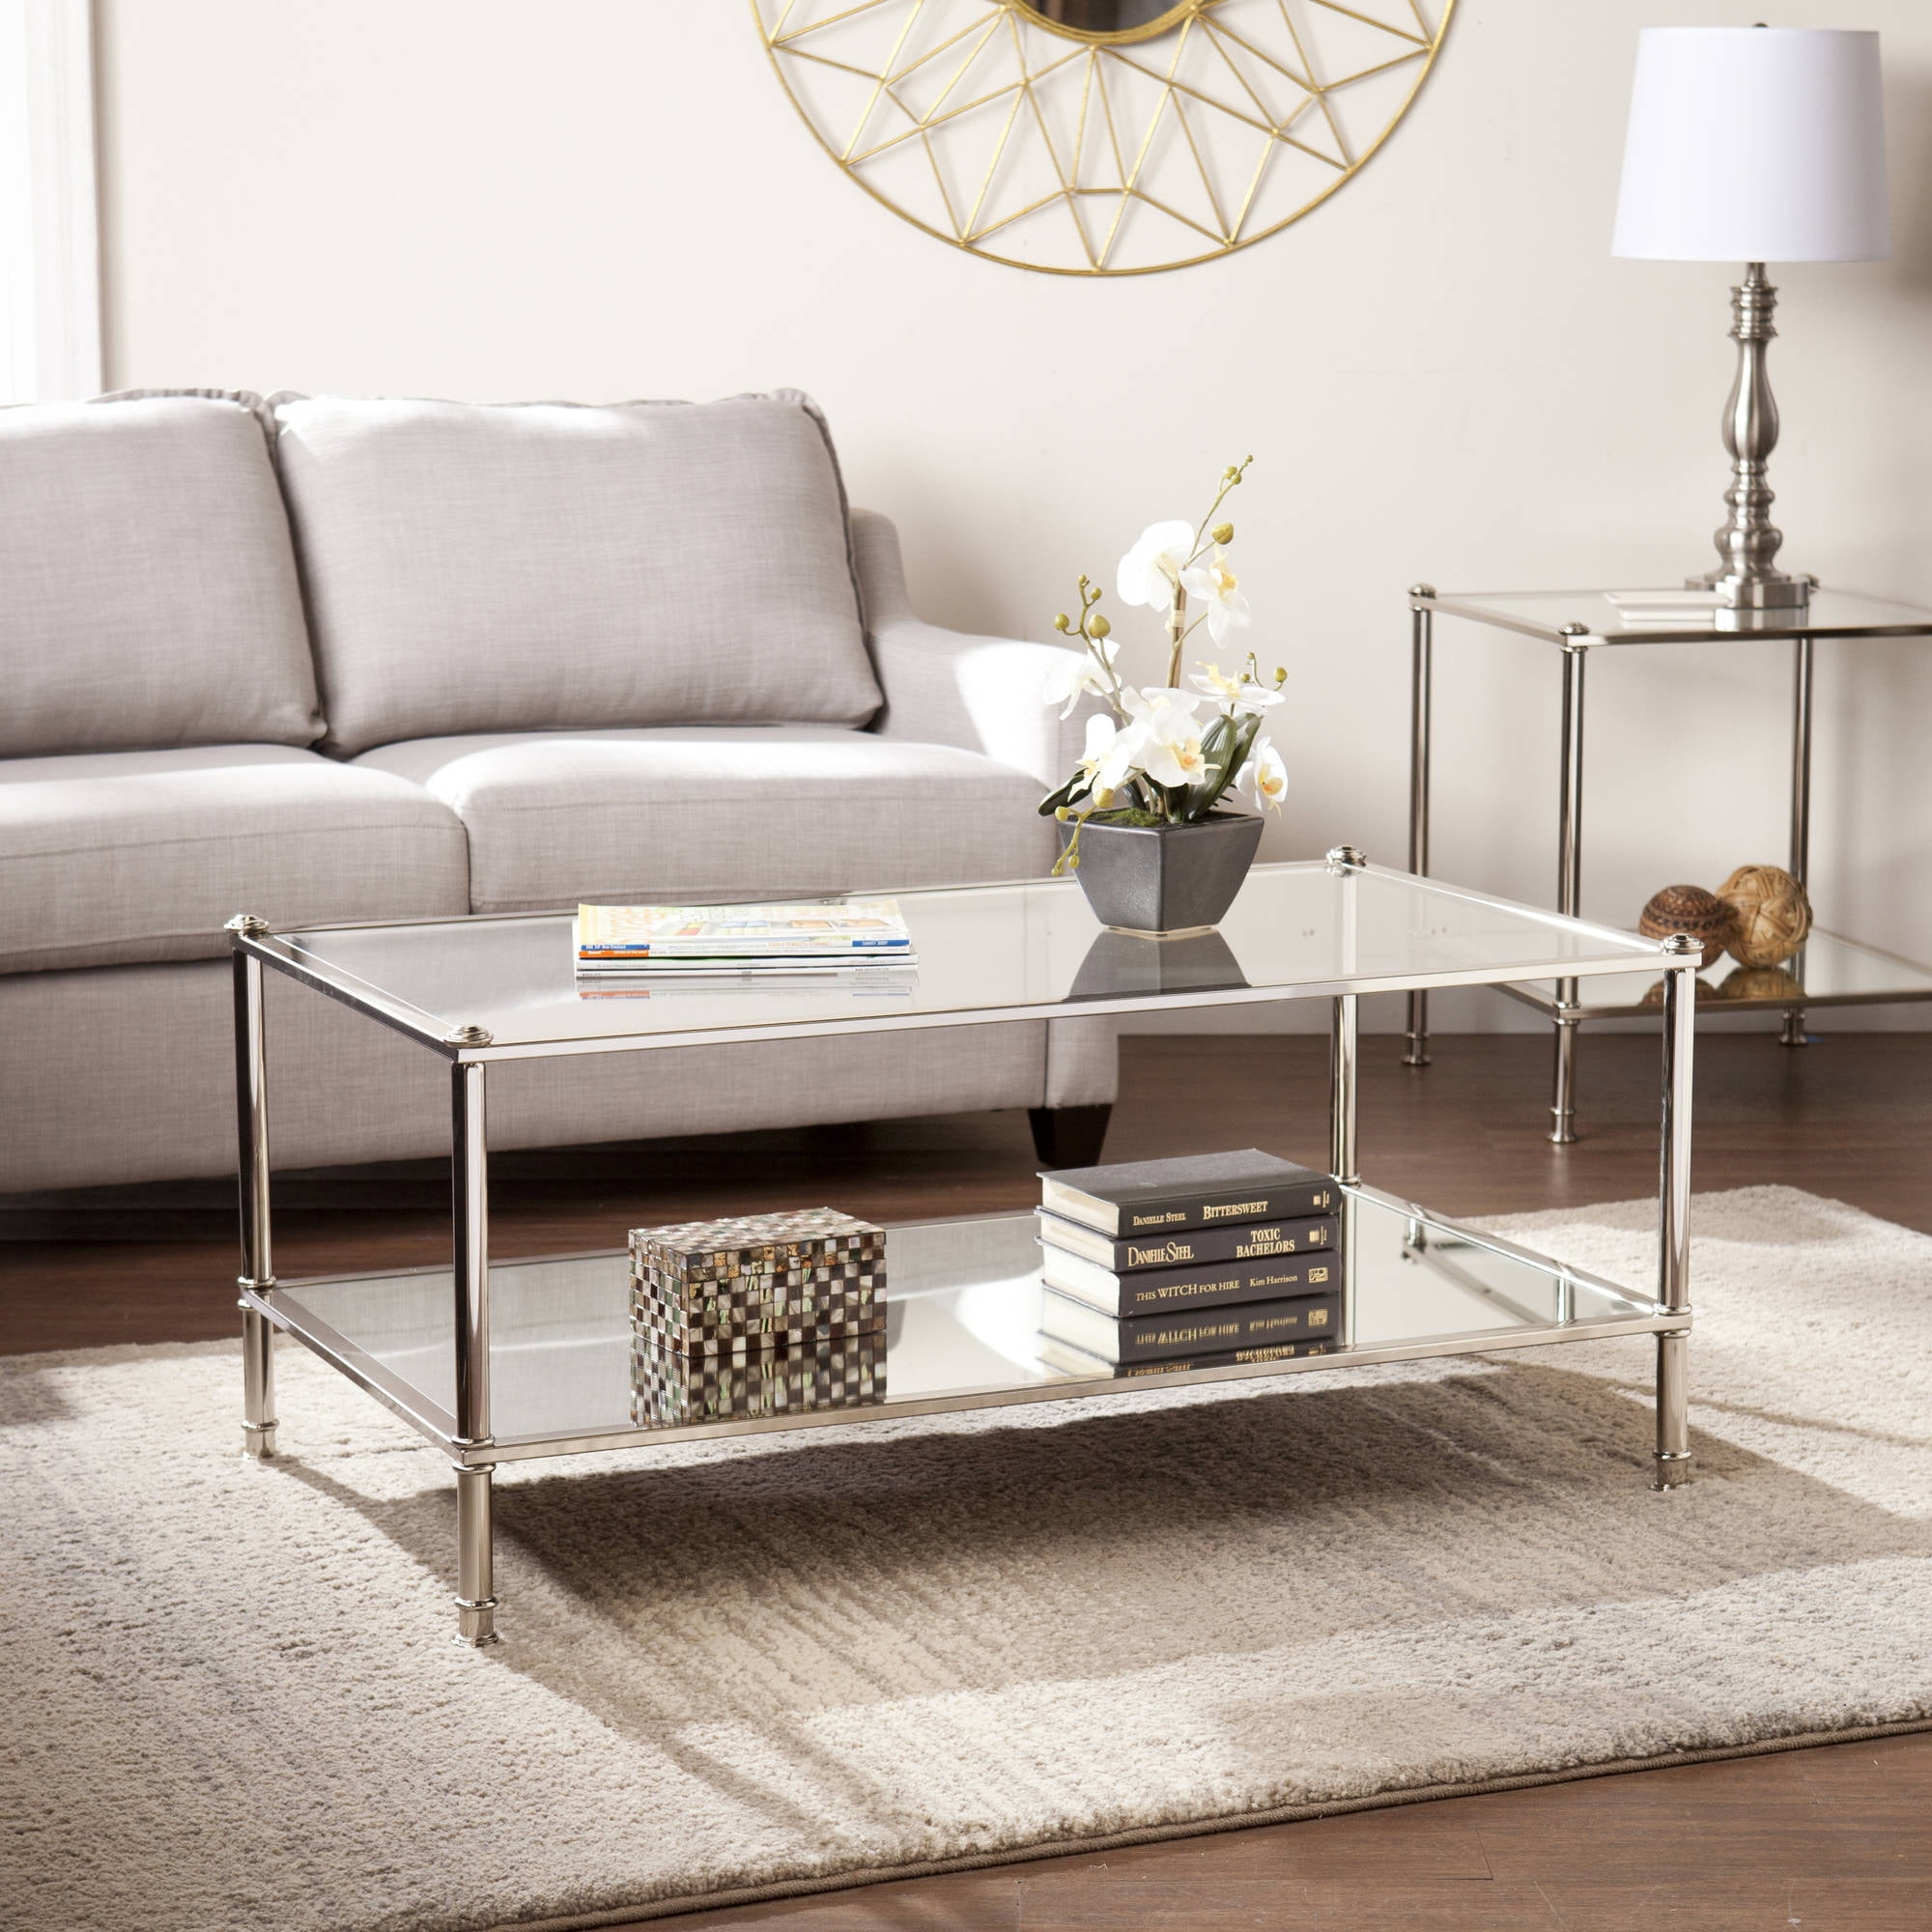 Details about   Coaster Modern Rectangular Coffee Table With Mirrored Shelf Chrome 720338 